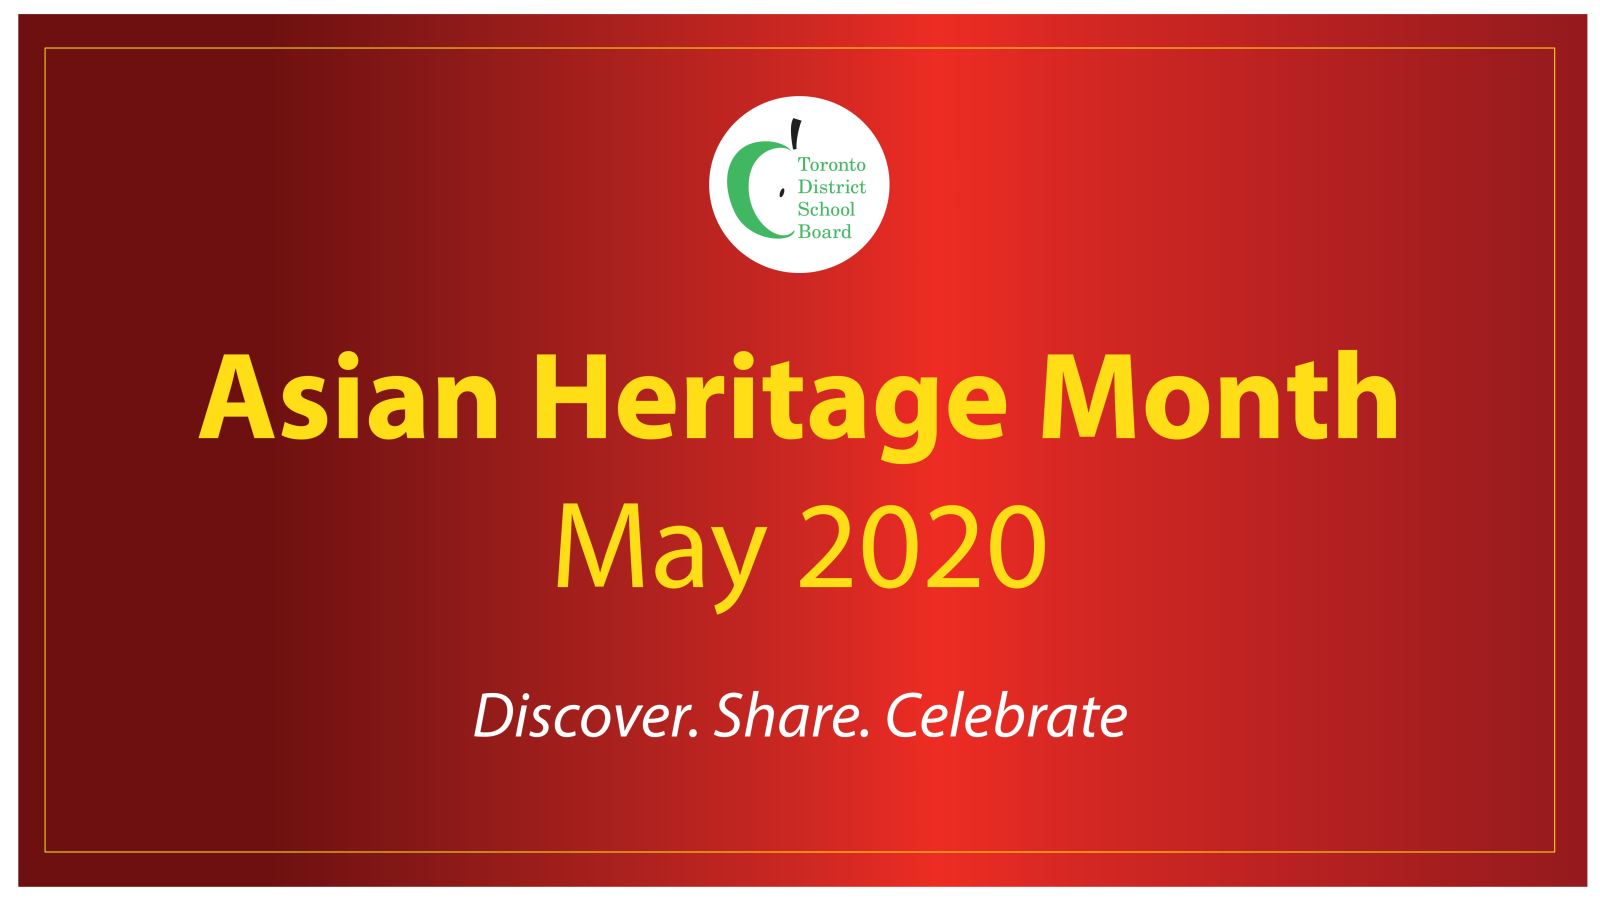 Asian Heritage Month 2020 notes theme of Discover, Share and Celebrate